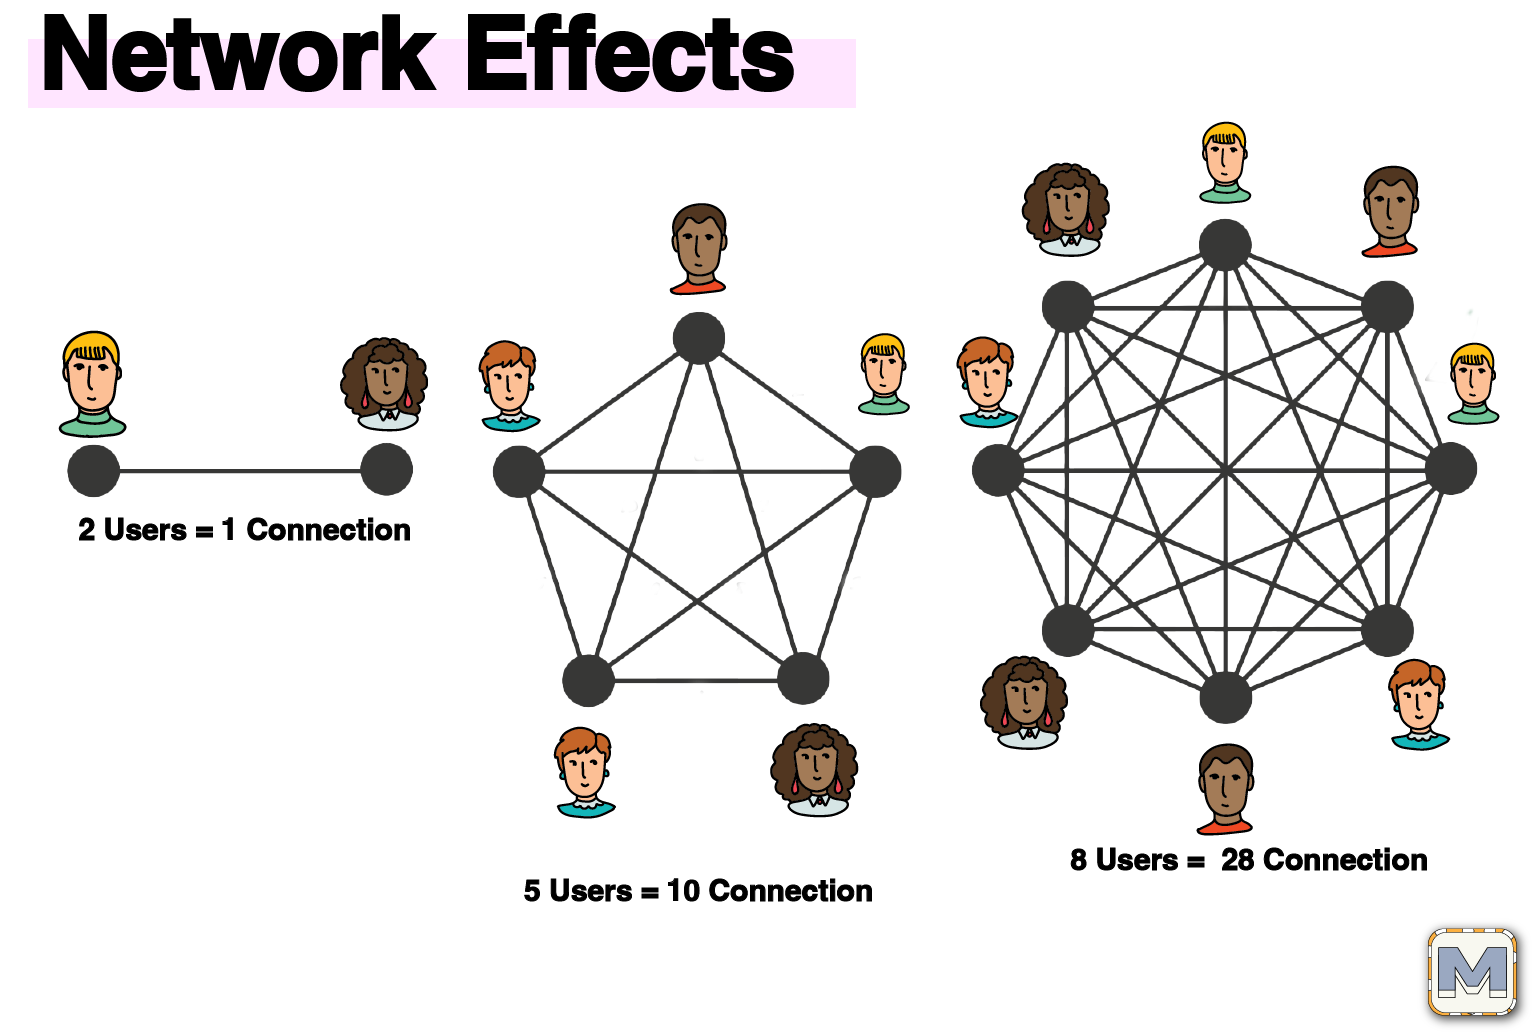 a diagram showing different types of network effects